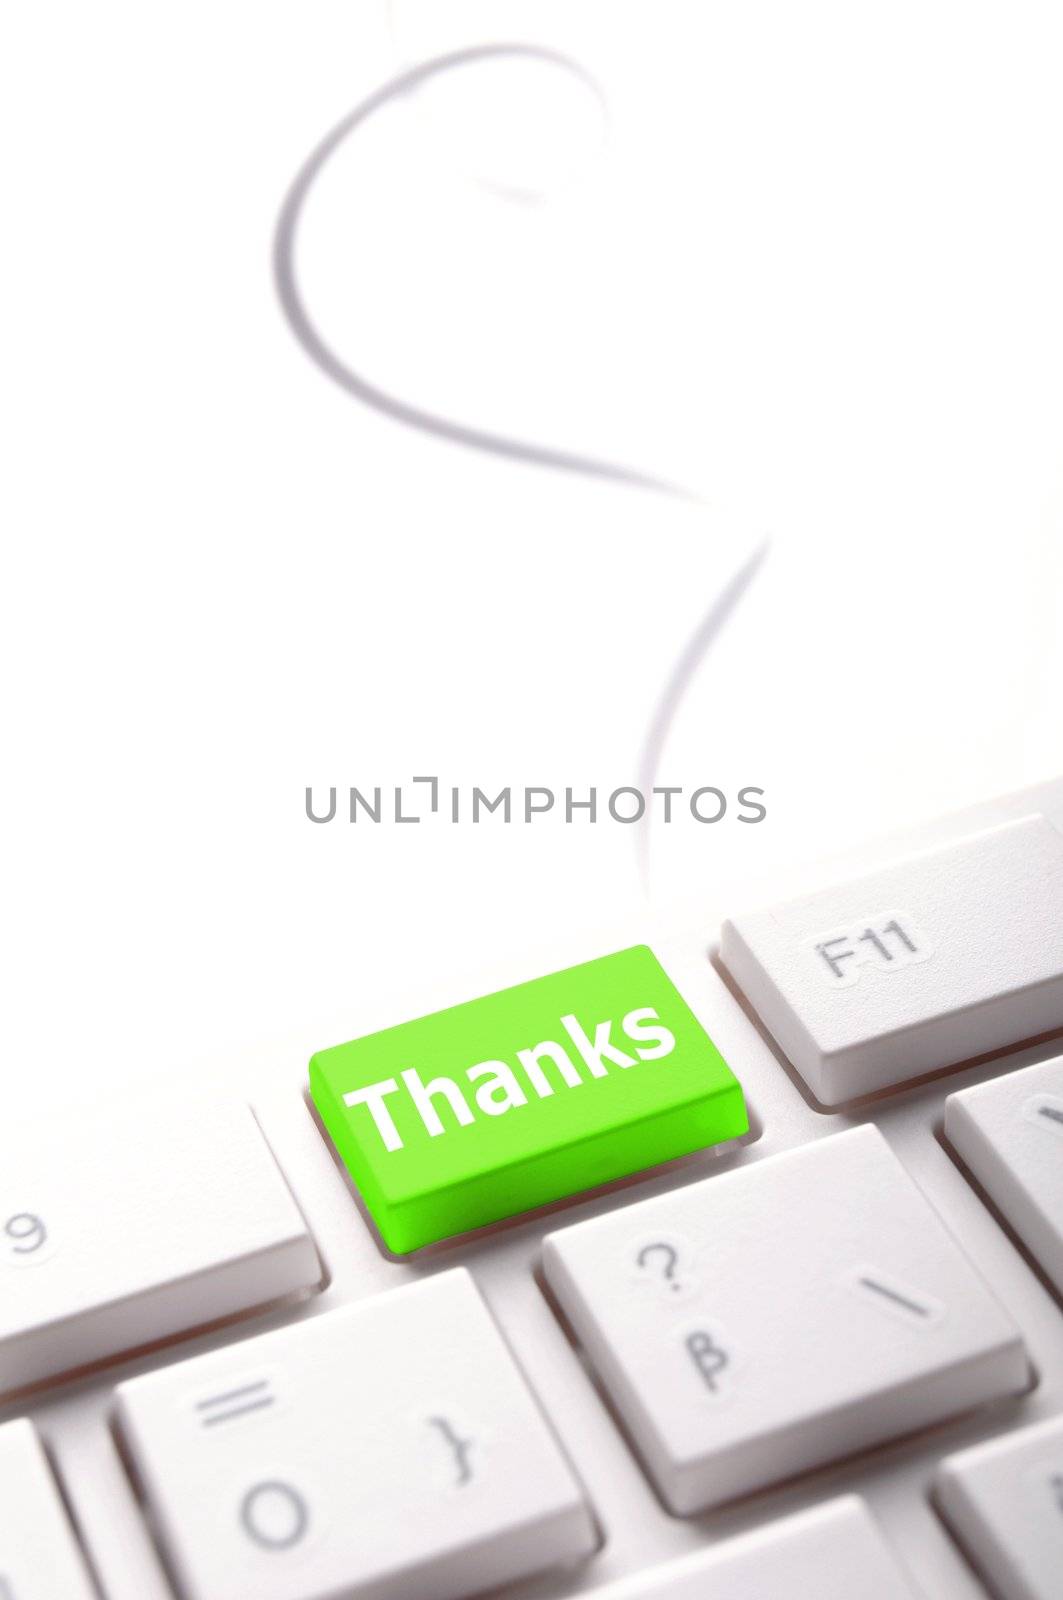 thank you or thanks concept with key on keyboard